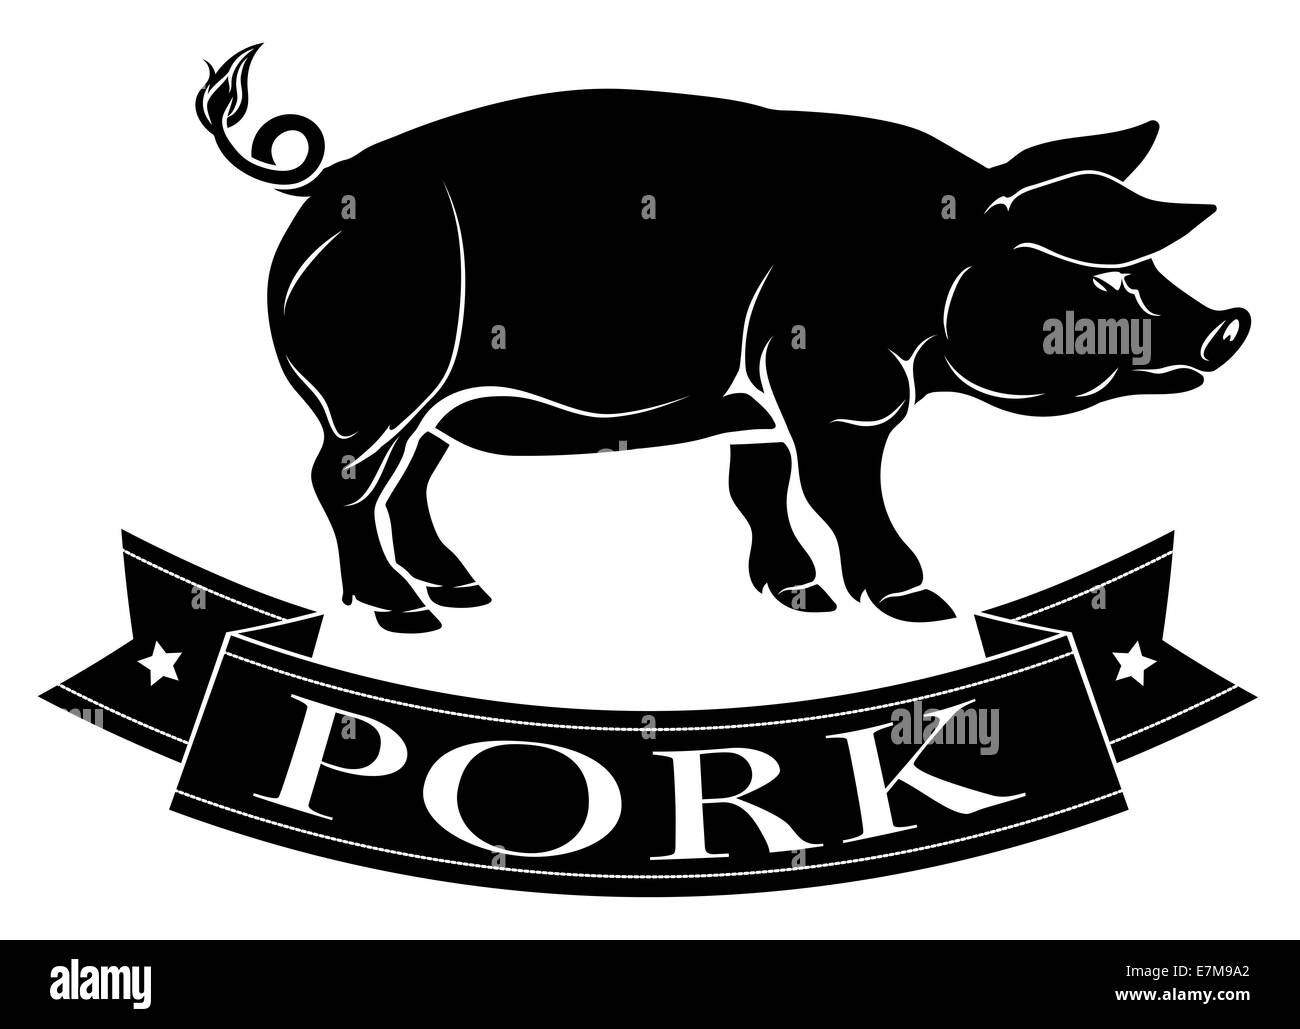 Pork meat food icon of a pig and banner reading pork Stock Photo